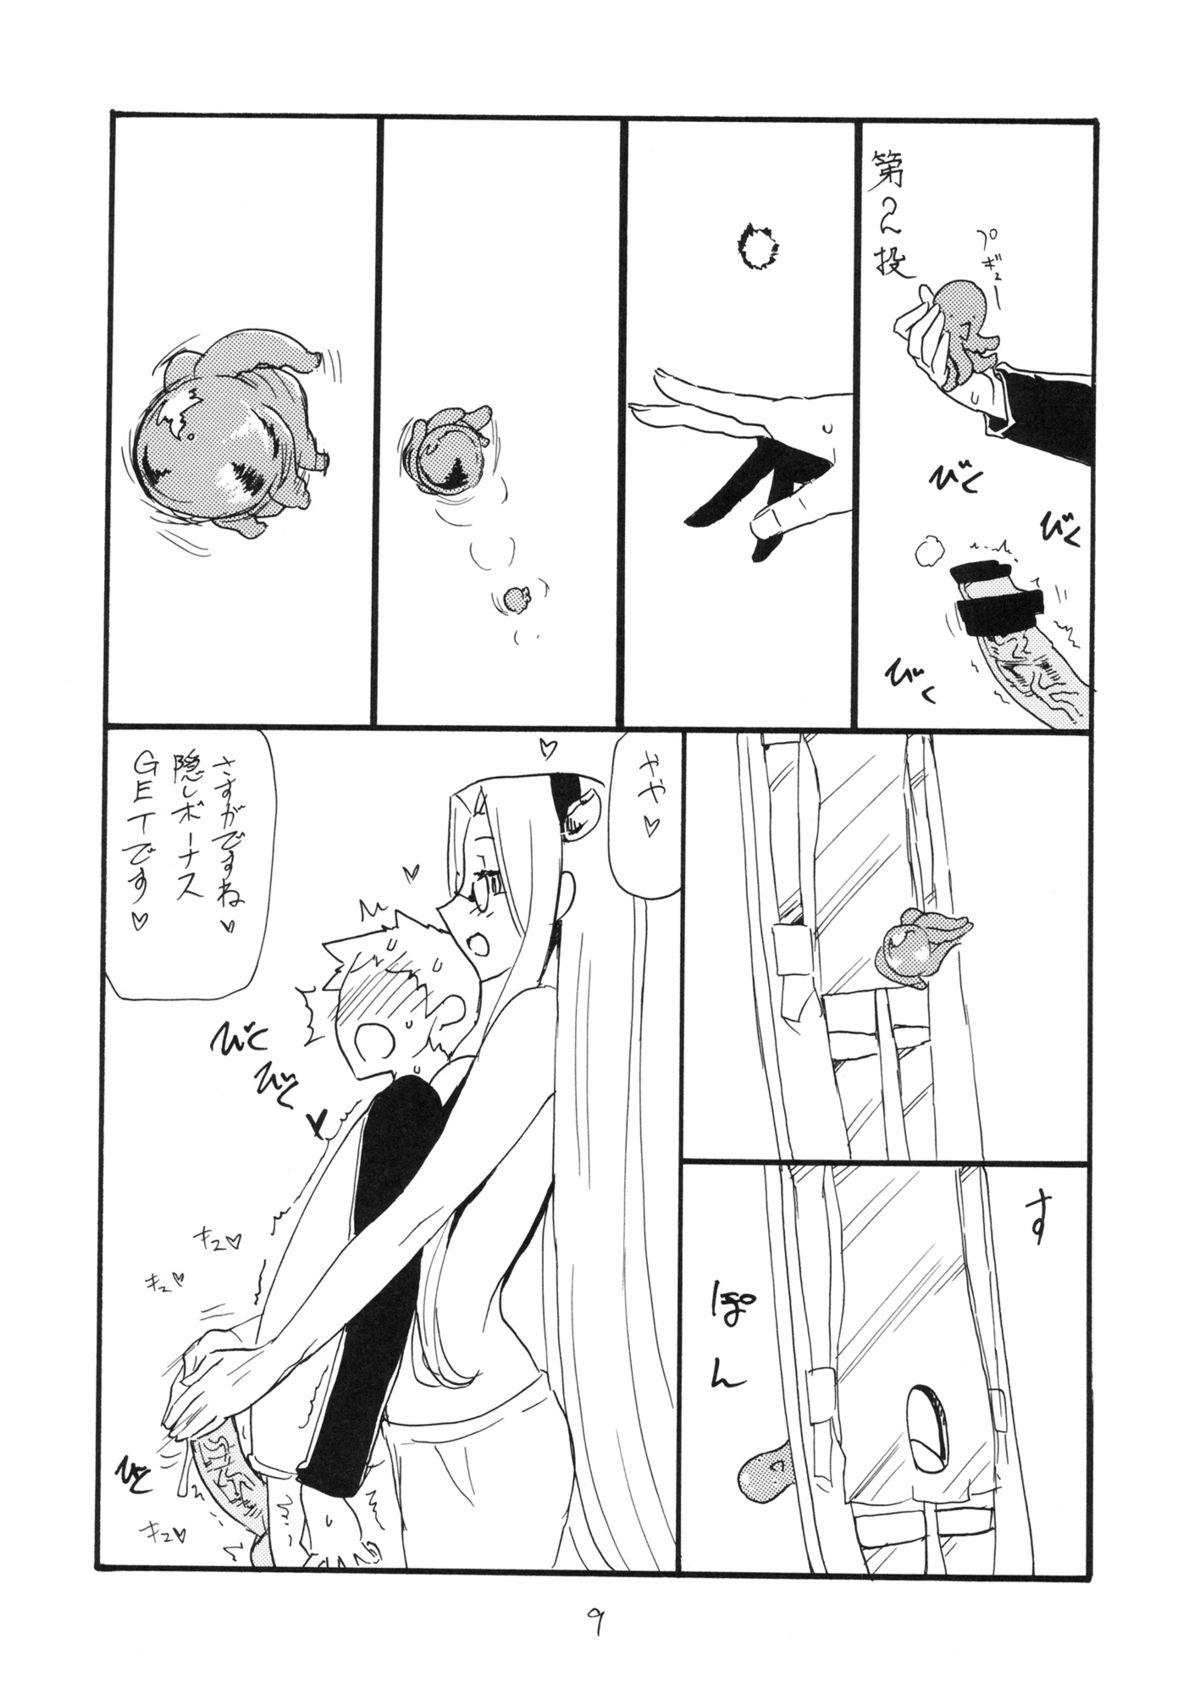 Perfect Teen Usshisshi - Fate stay night Stretching - Page 8